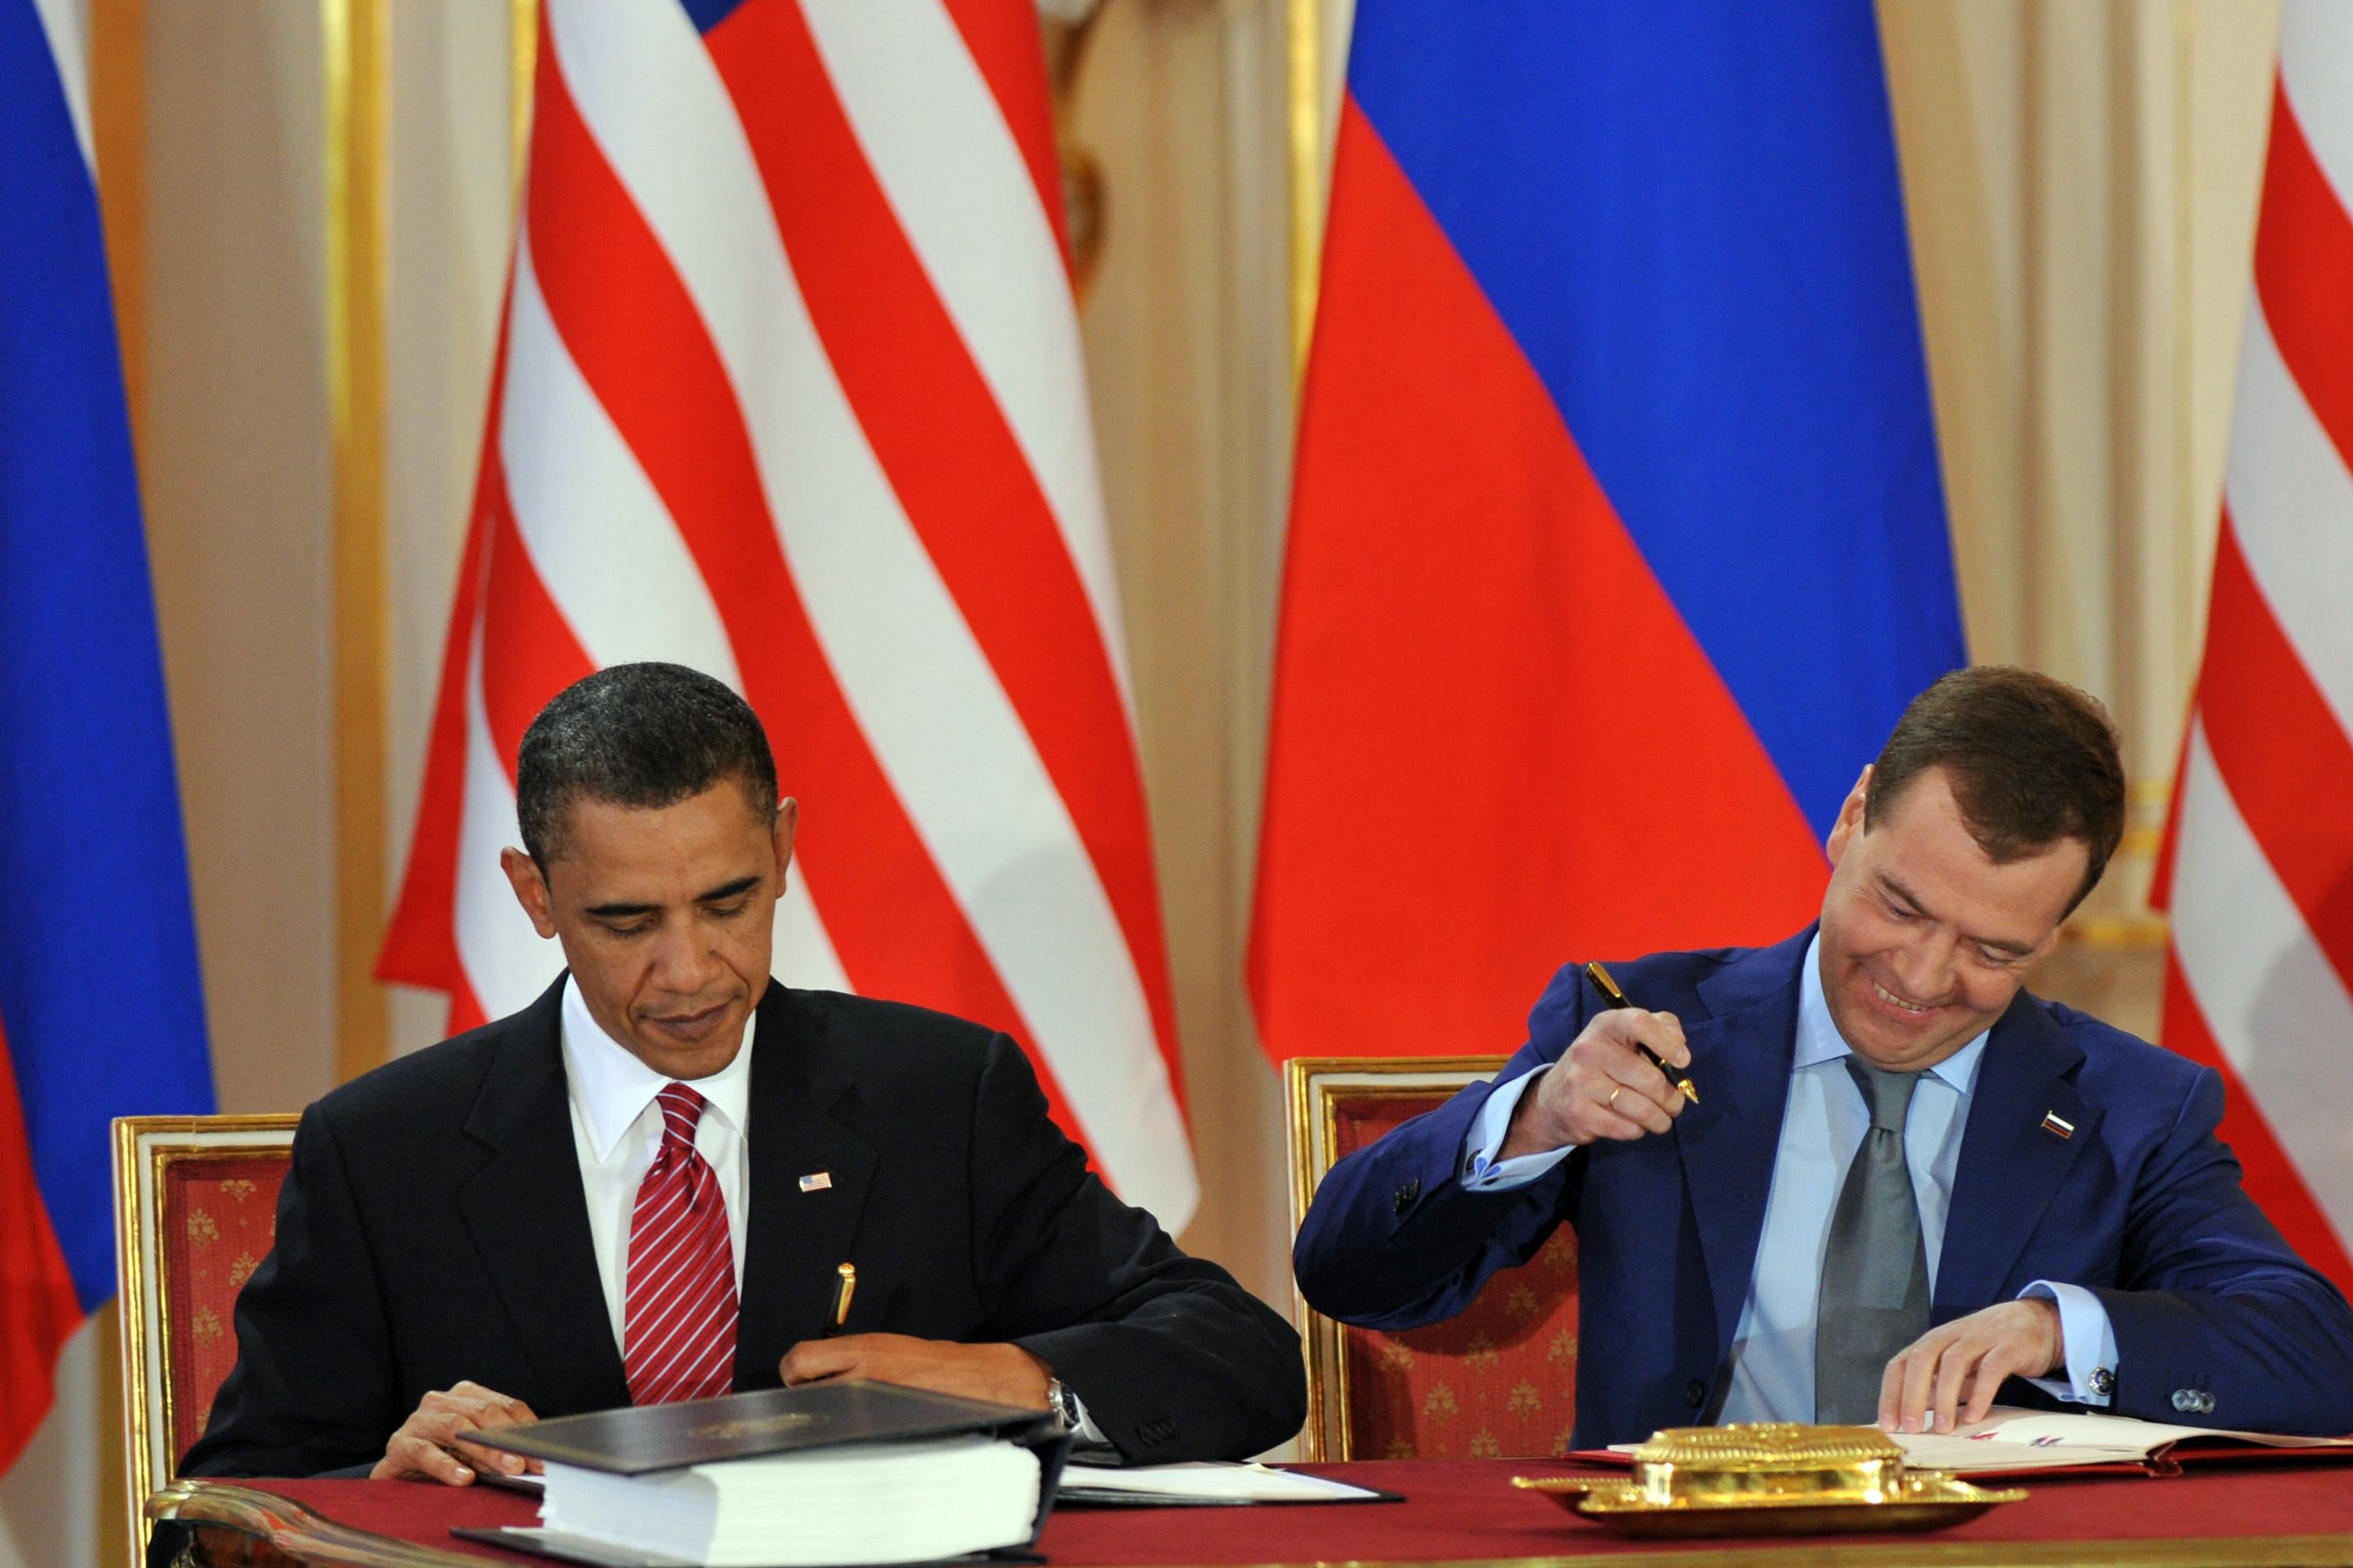 Obama and Medvedev each sign their copy of the treaty, sitting beside each other at a table with American and Russian flags behind them. Medvedev smiles broadly as he puts pen to paper.